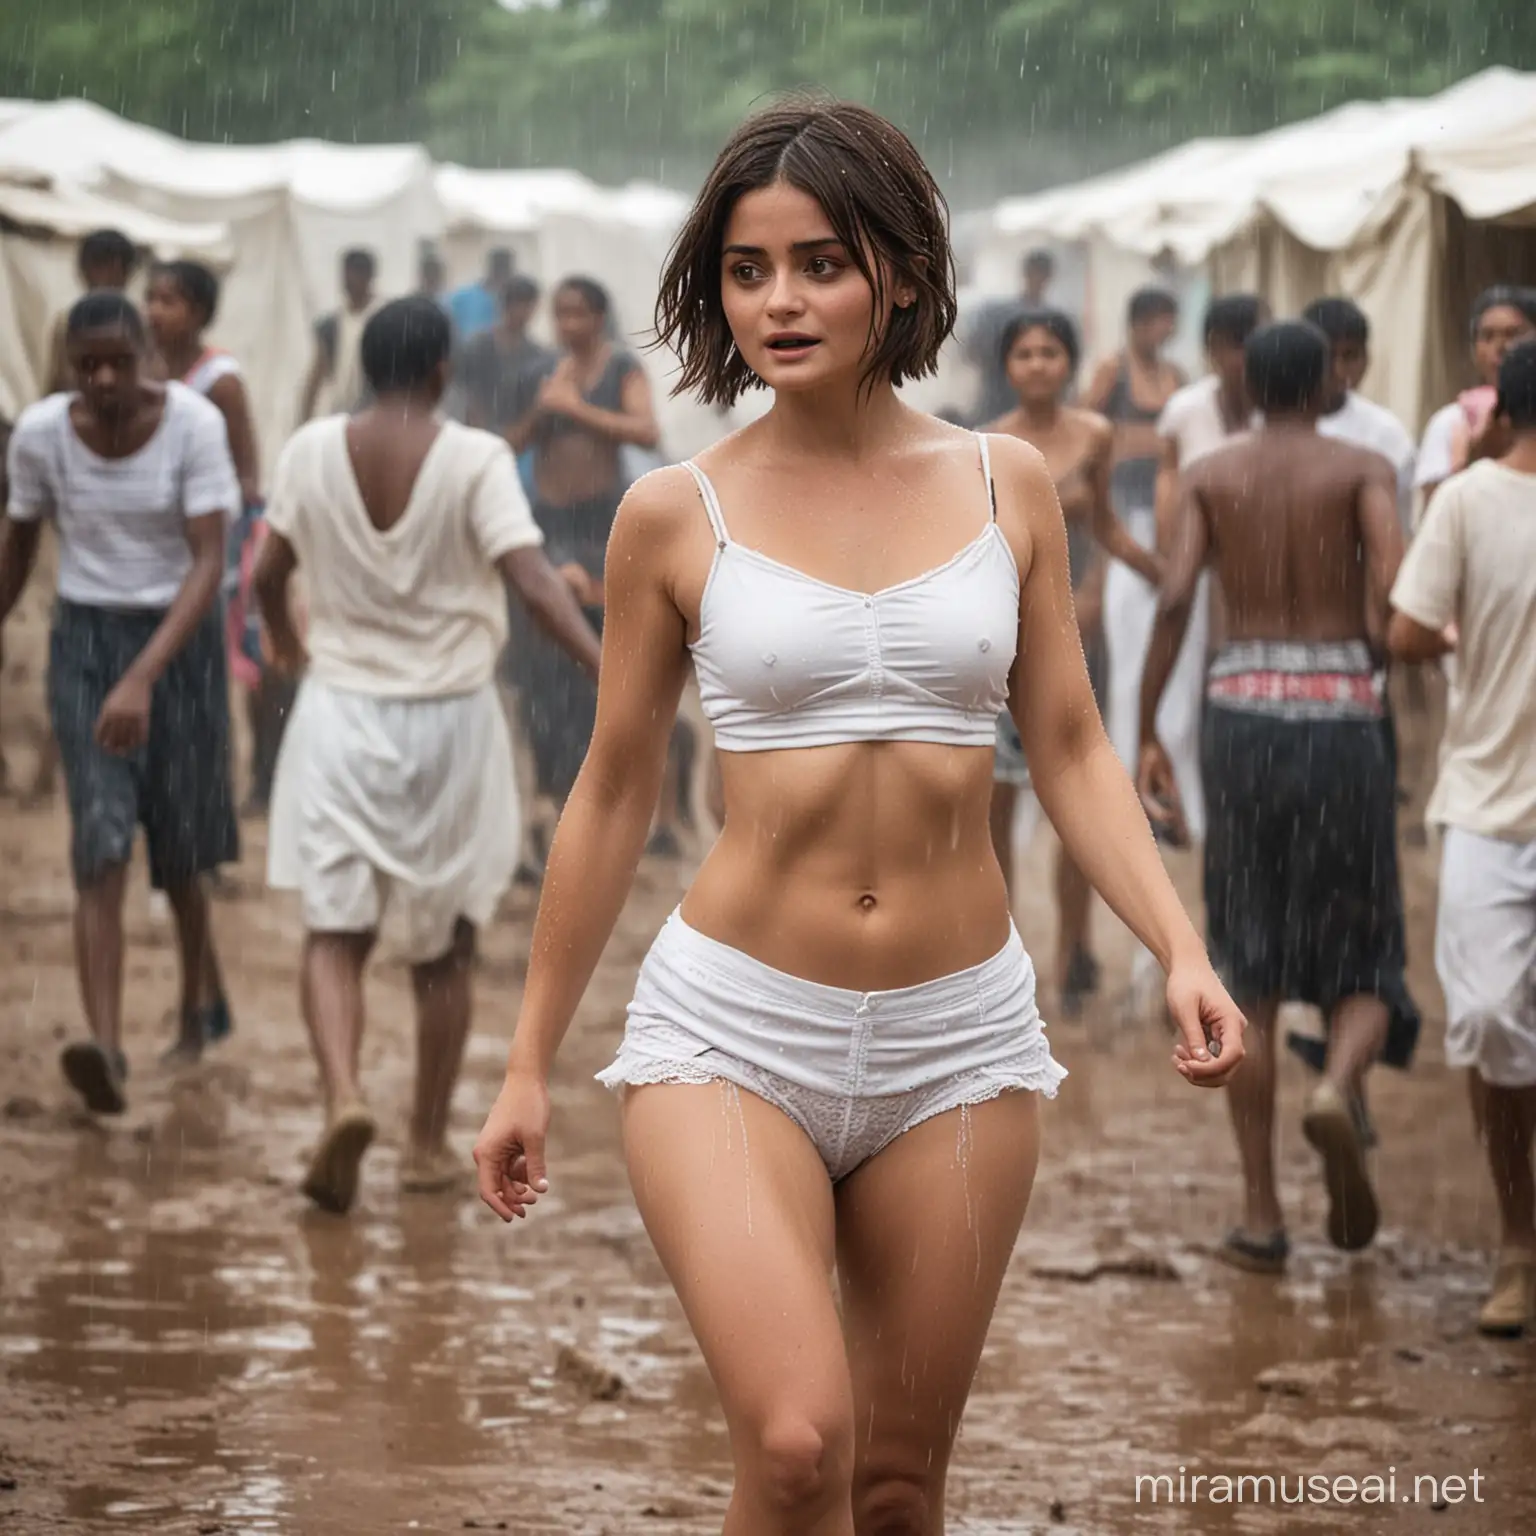 Jenna Coleman Dancing in Rain at Crowded Refugee Camp